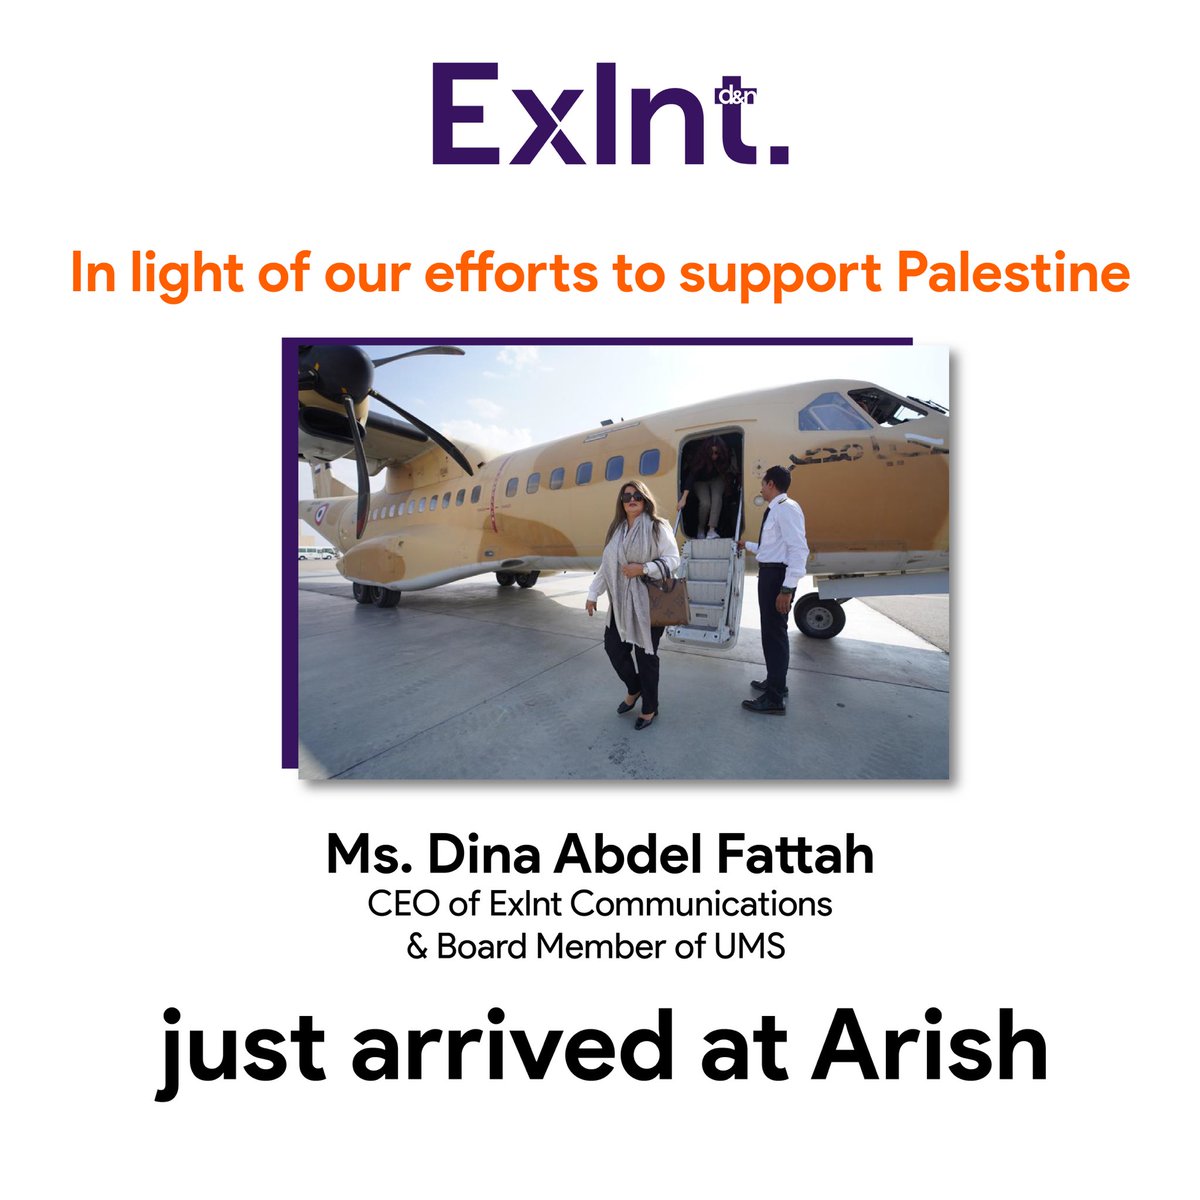 Ms. Dina Abdel Fattah, CEO of Exlnt Communications and Board member of UMS, just arrived at Al-Arish…

#FreePalestine #Top50 #Top50WomenForum #RafahBorderCrossing